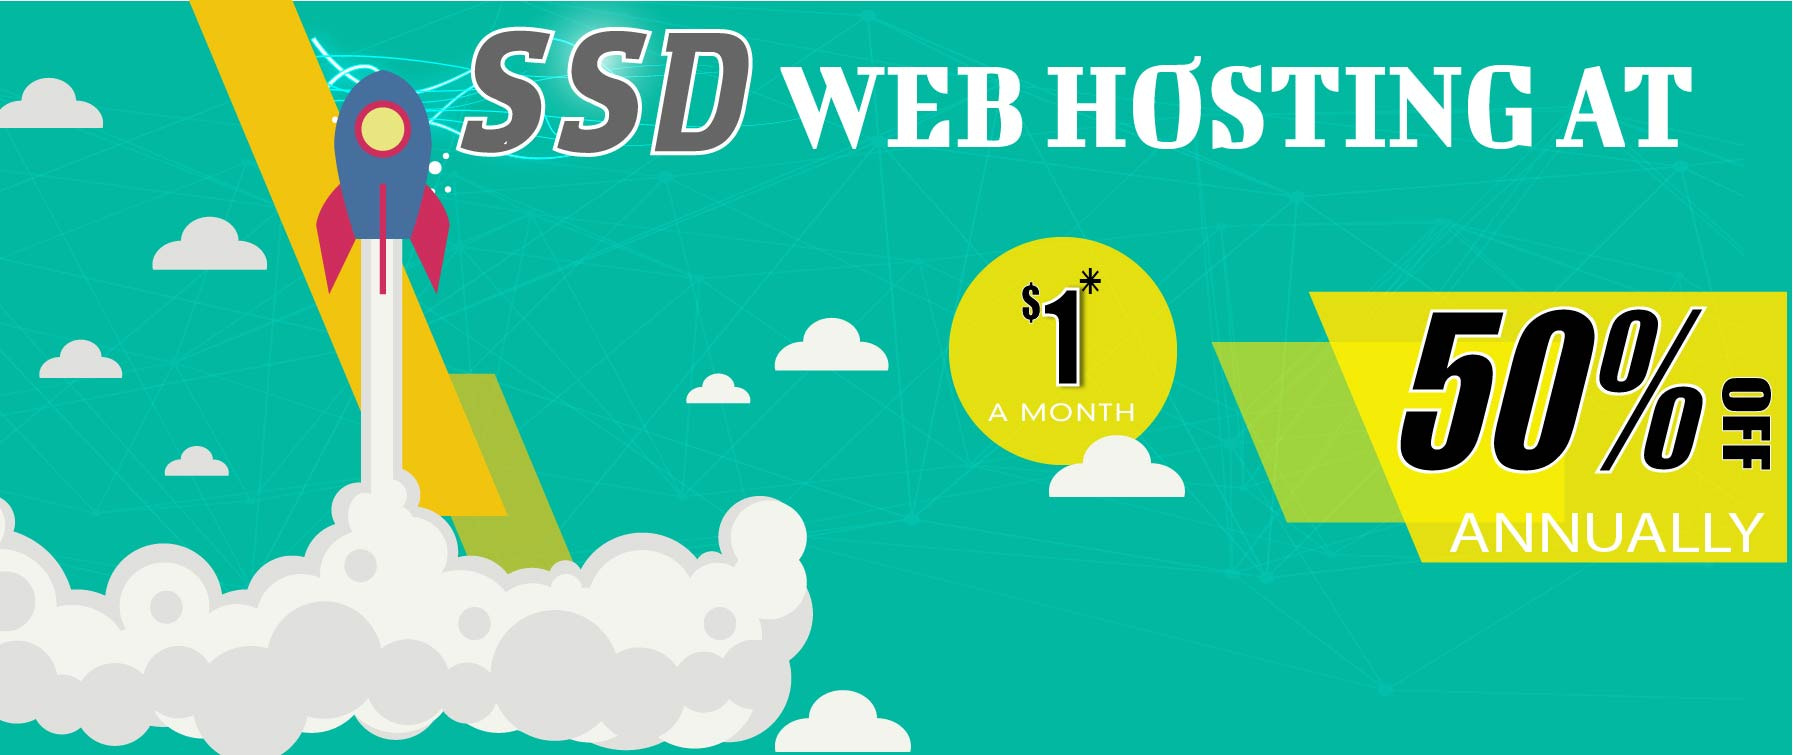 which is the cheap and best web hosting?